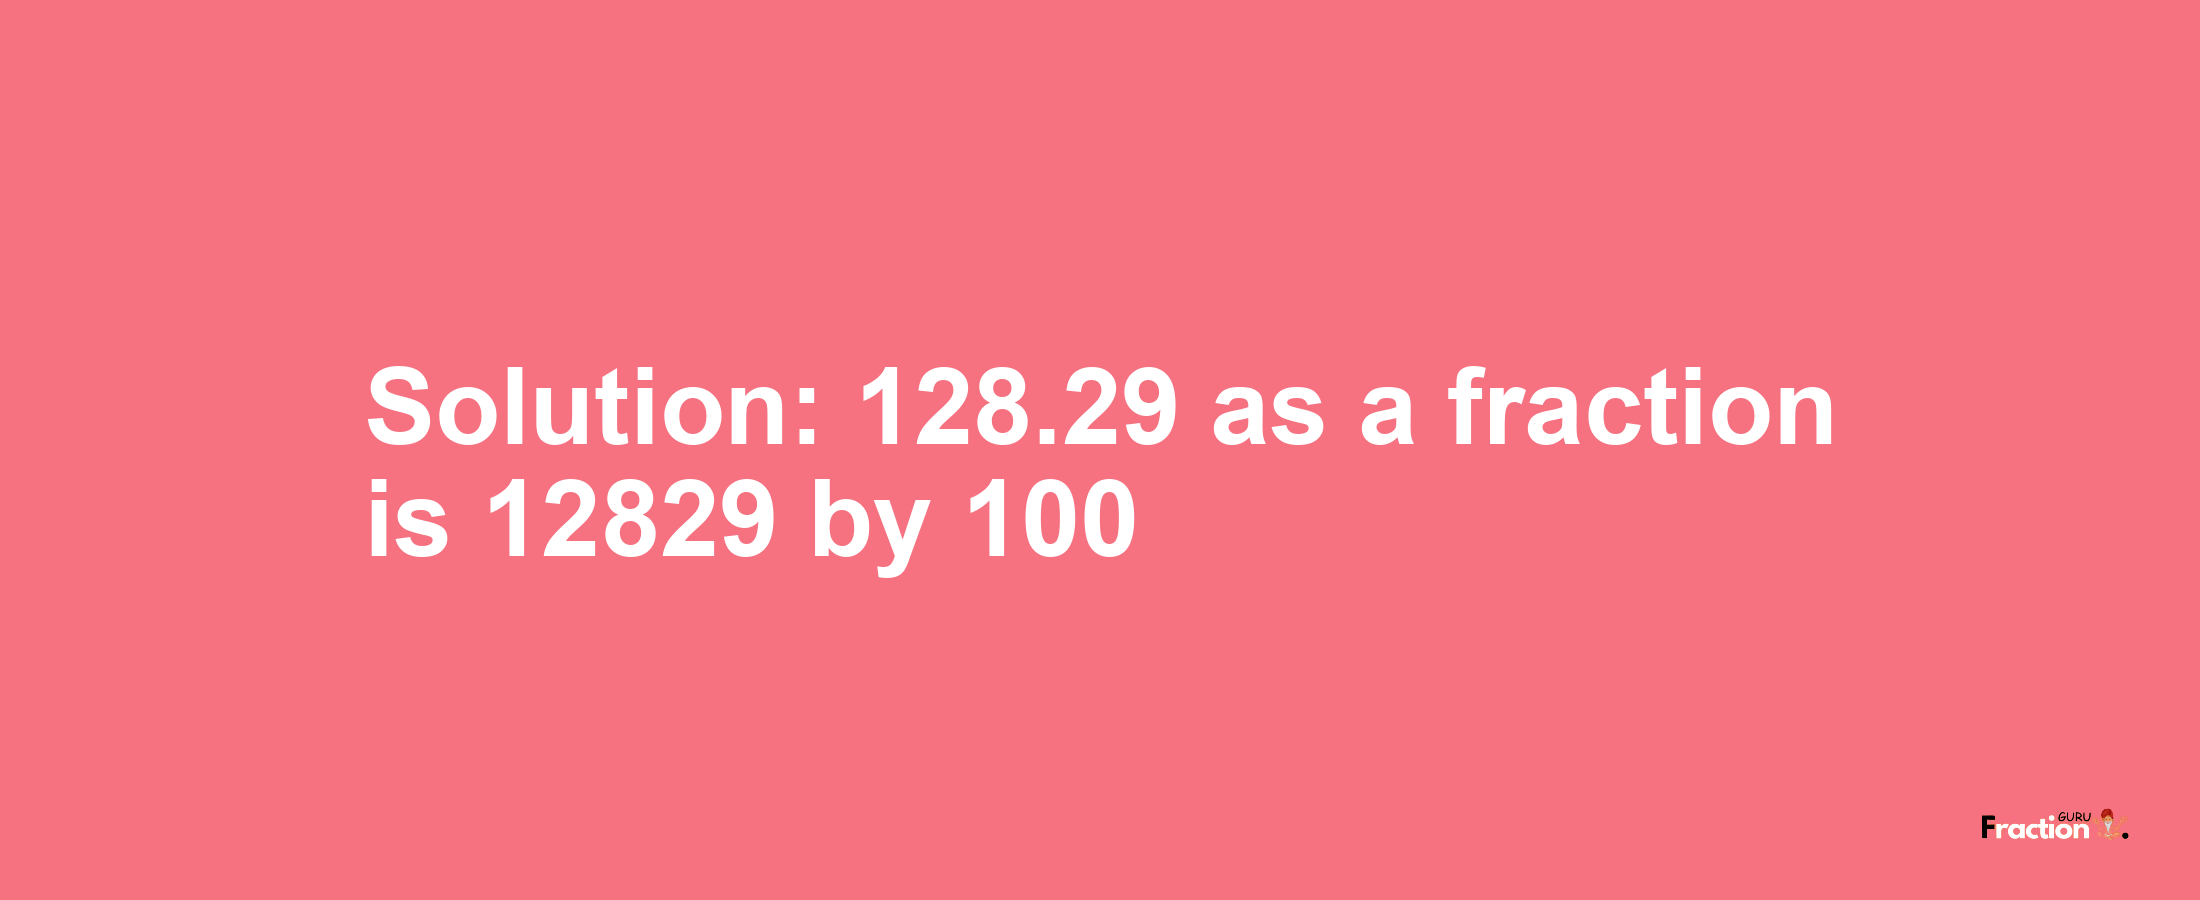 Solution:128.29 as a fraction is 12829/100